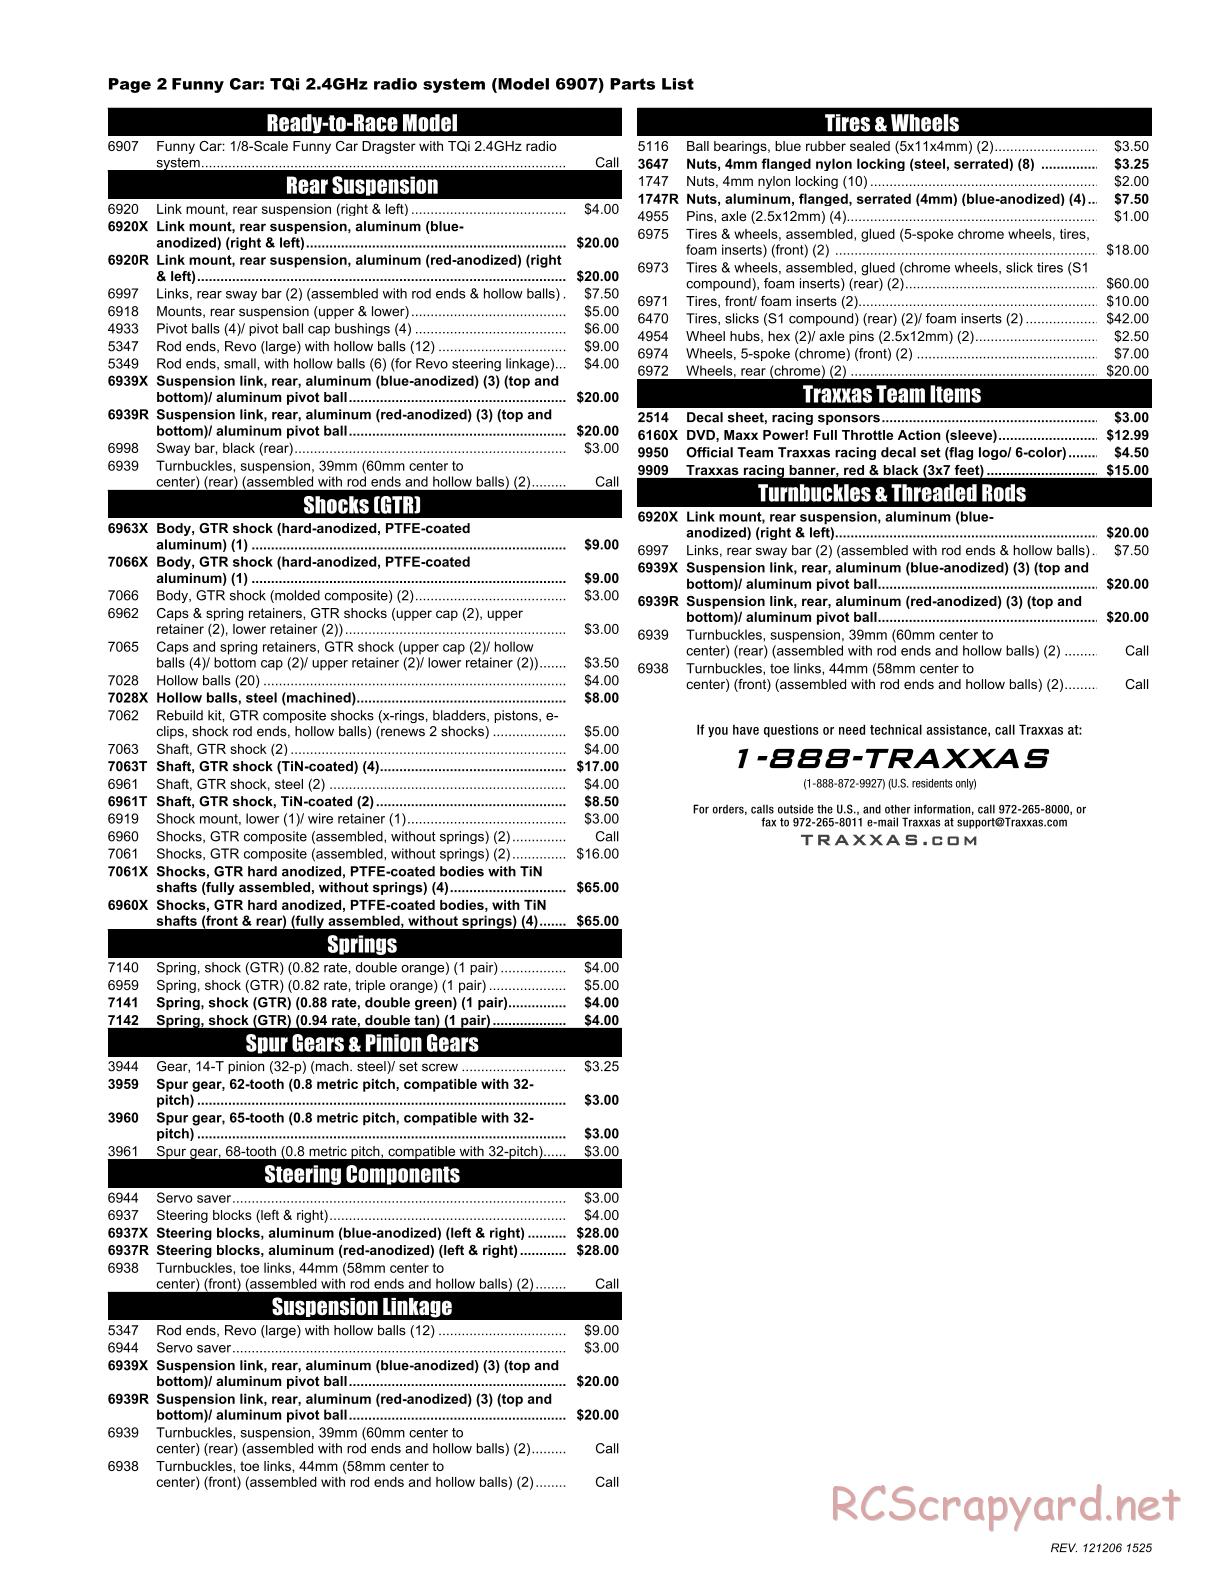 Traxxas - Funny Car (2012) - Parts List - Page 2